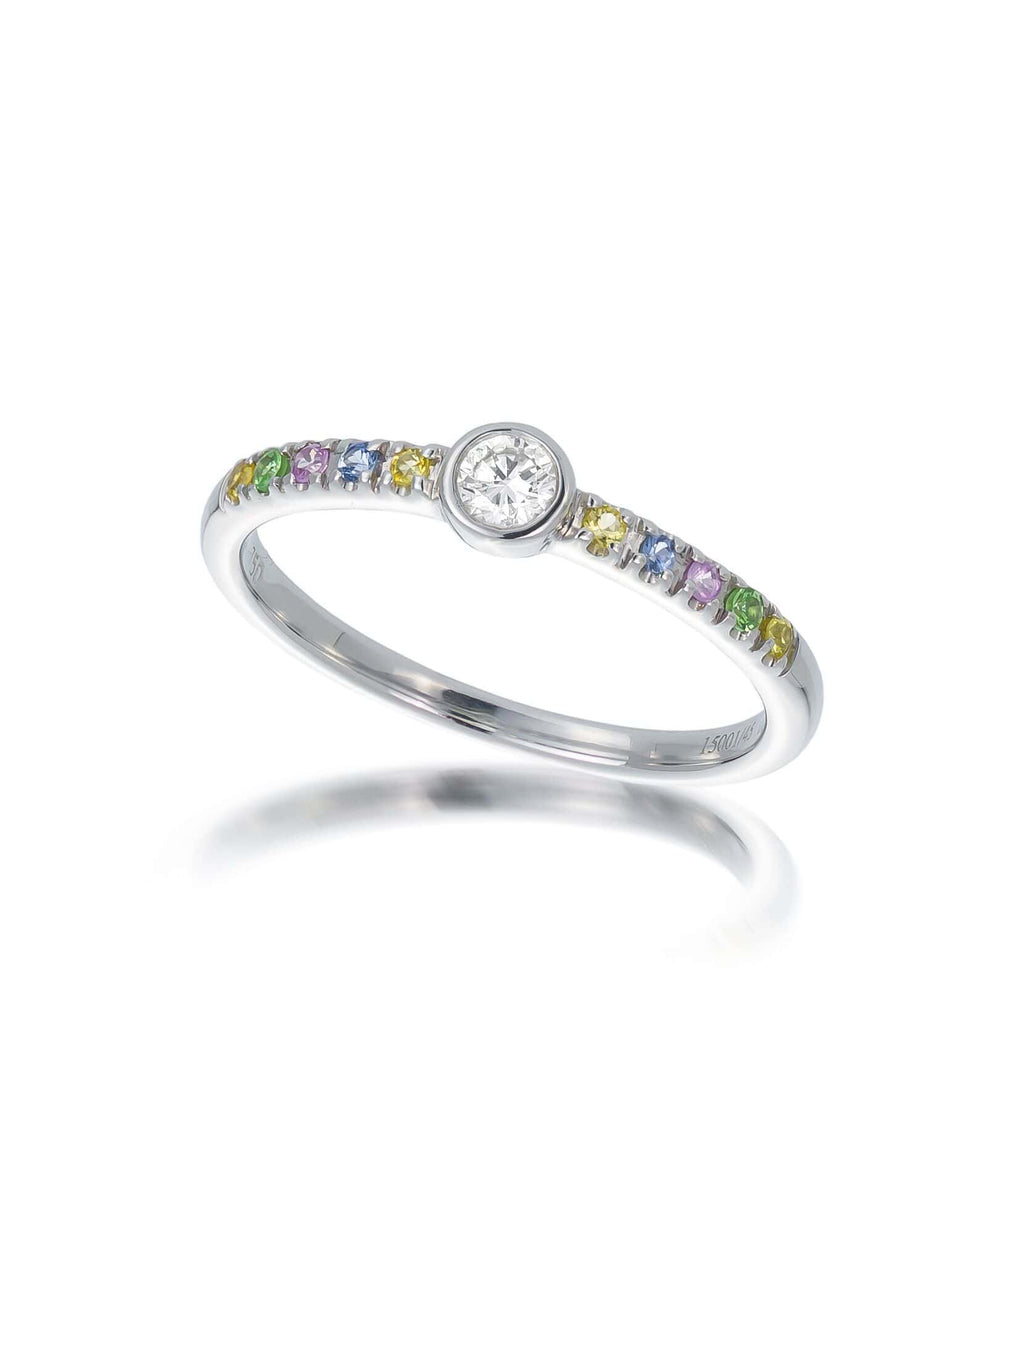 Isabelle Langlois Pointillist Mixed Gemstone Stack Ring